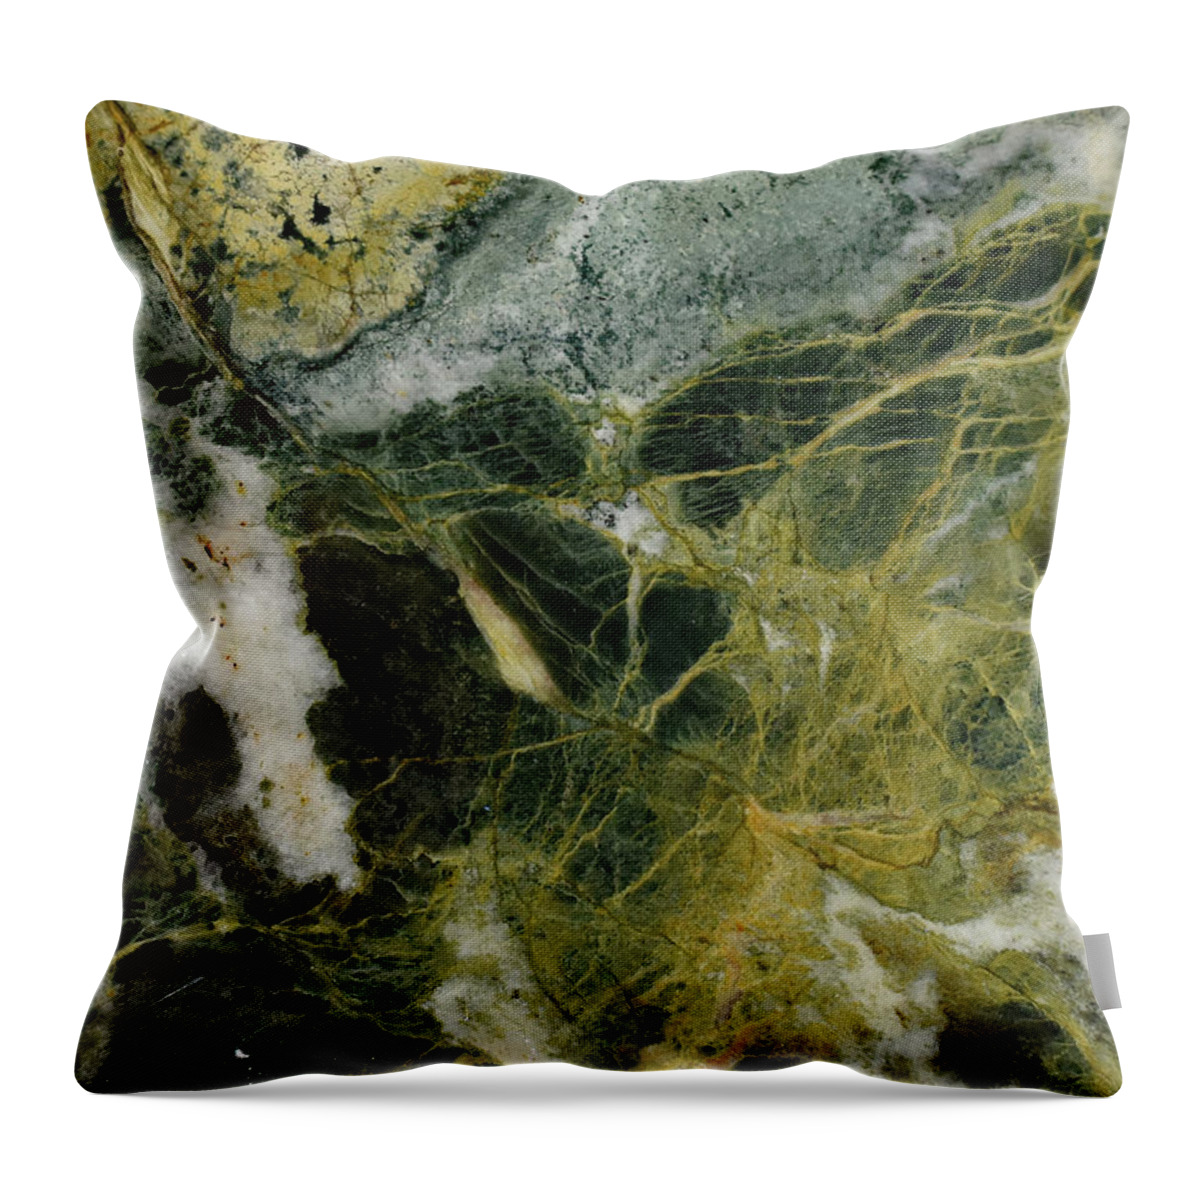 Art In A Rock Throw Pillow featuring the photograph Mr1005d by Art in a Rock